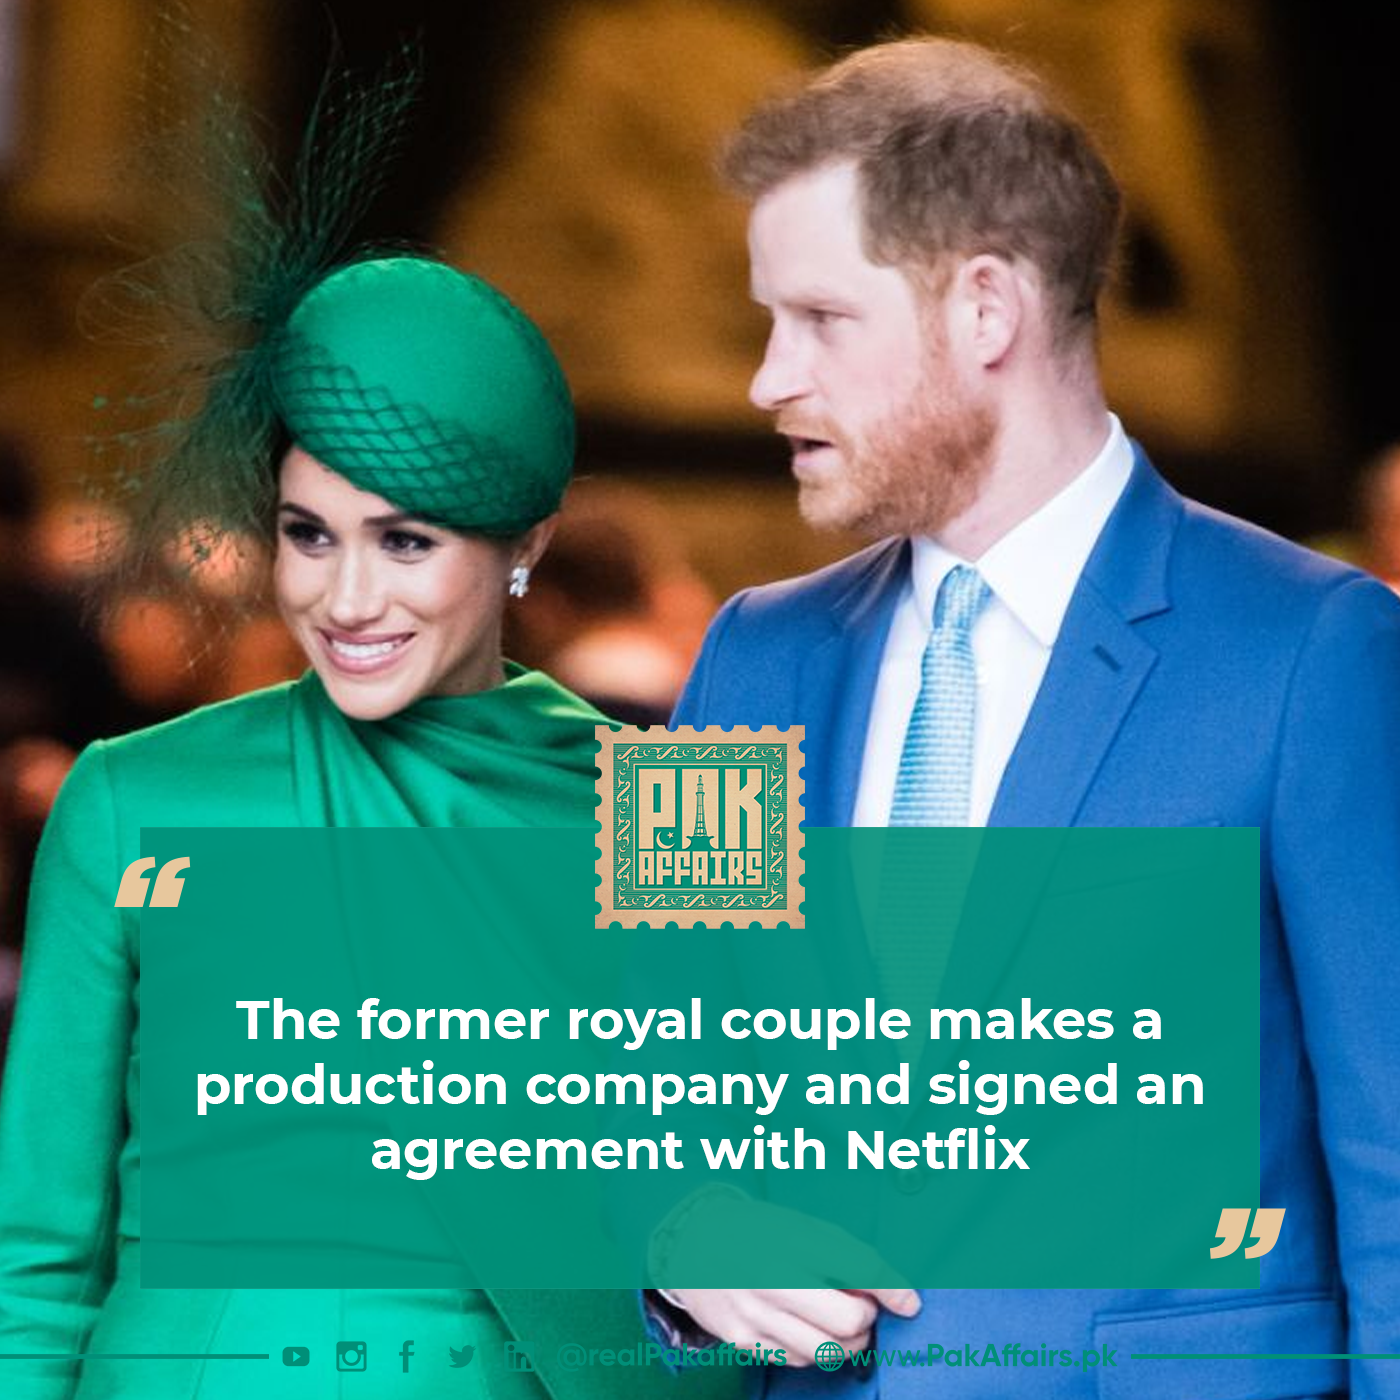 The former royal couple makes a production company and signed an agreement with Netflix